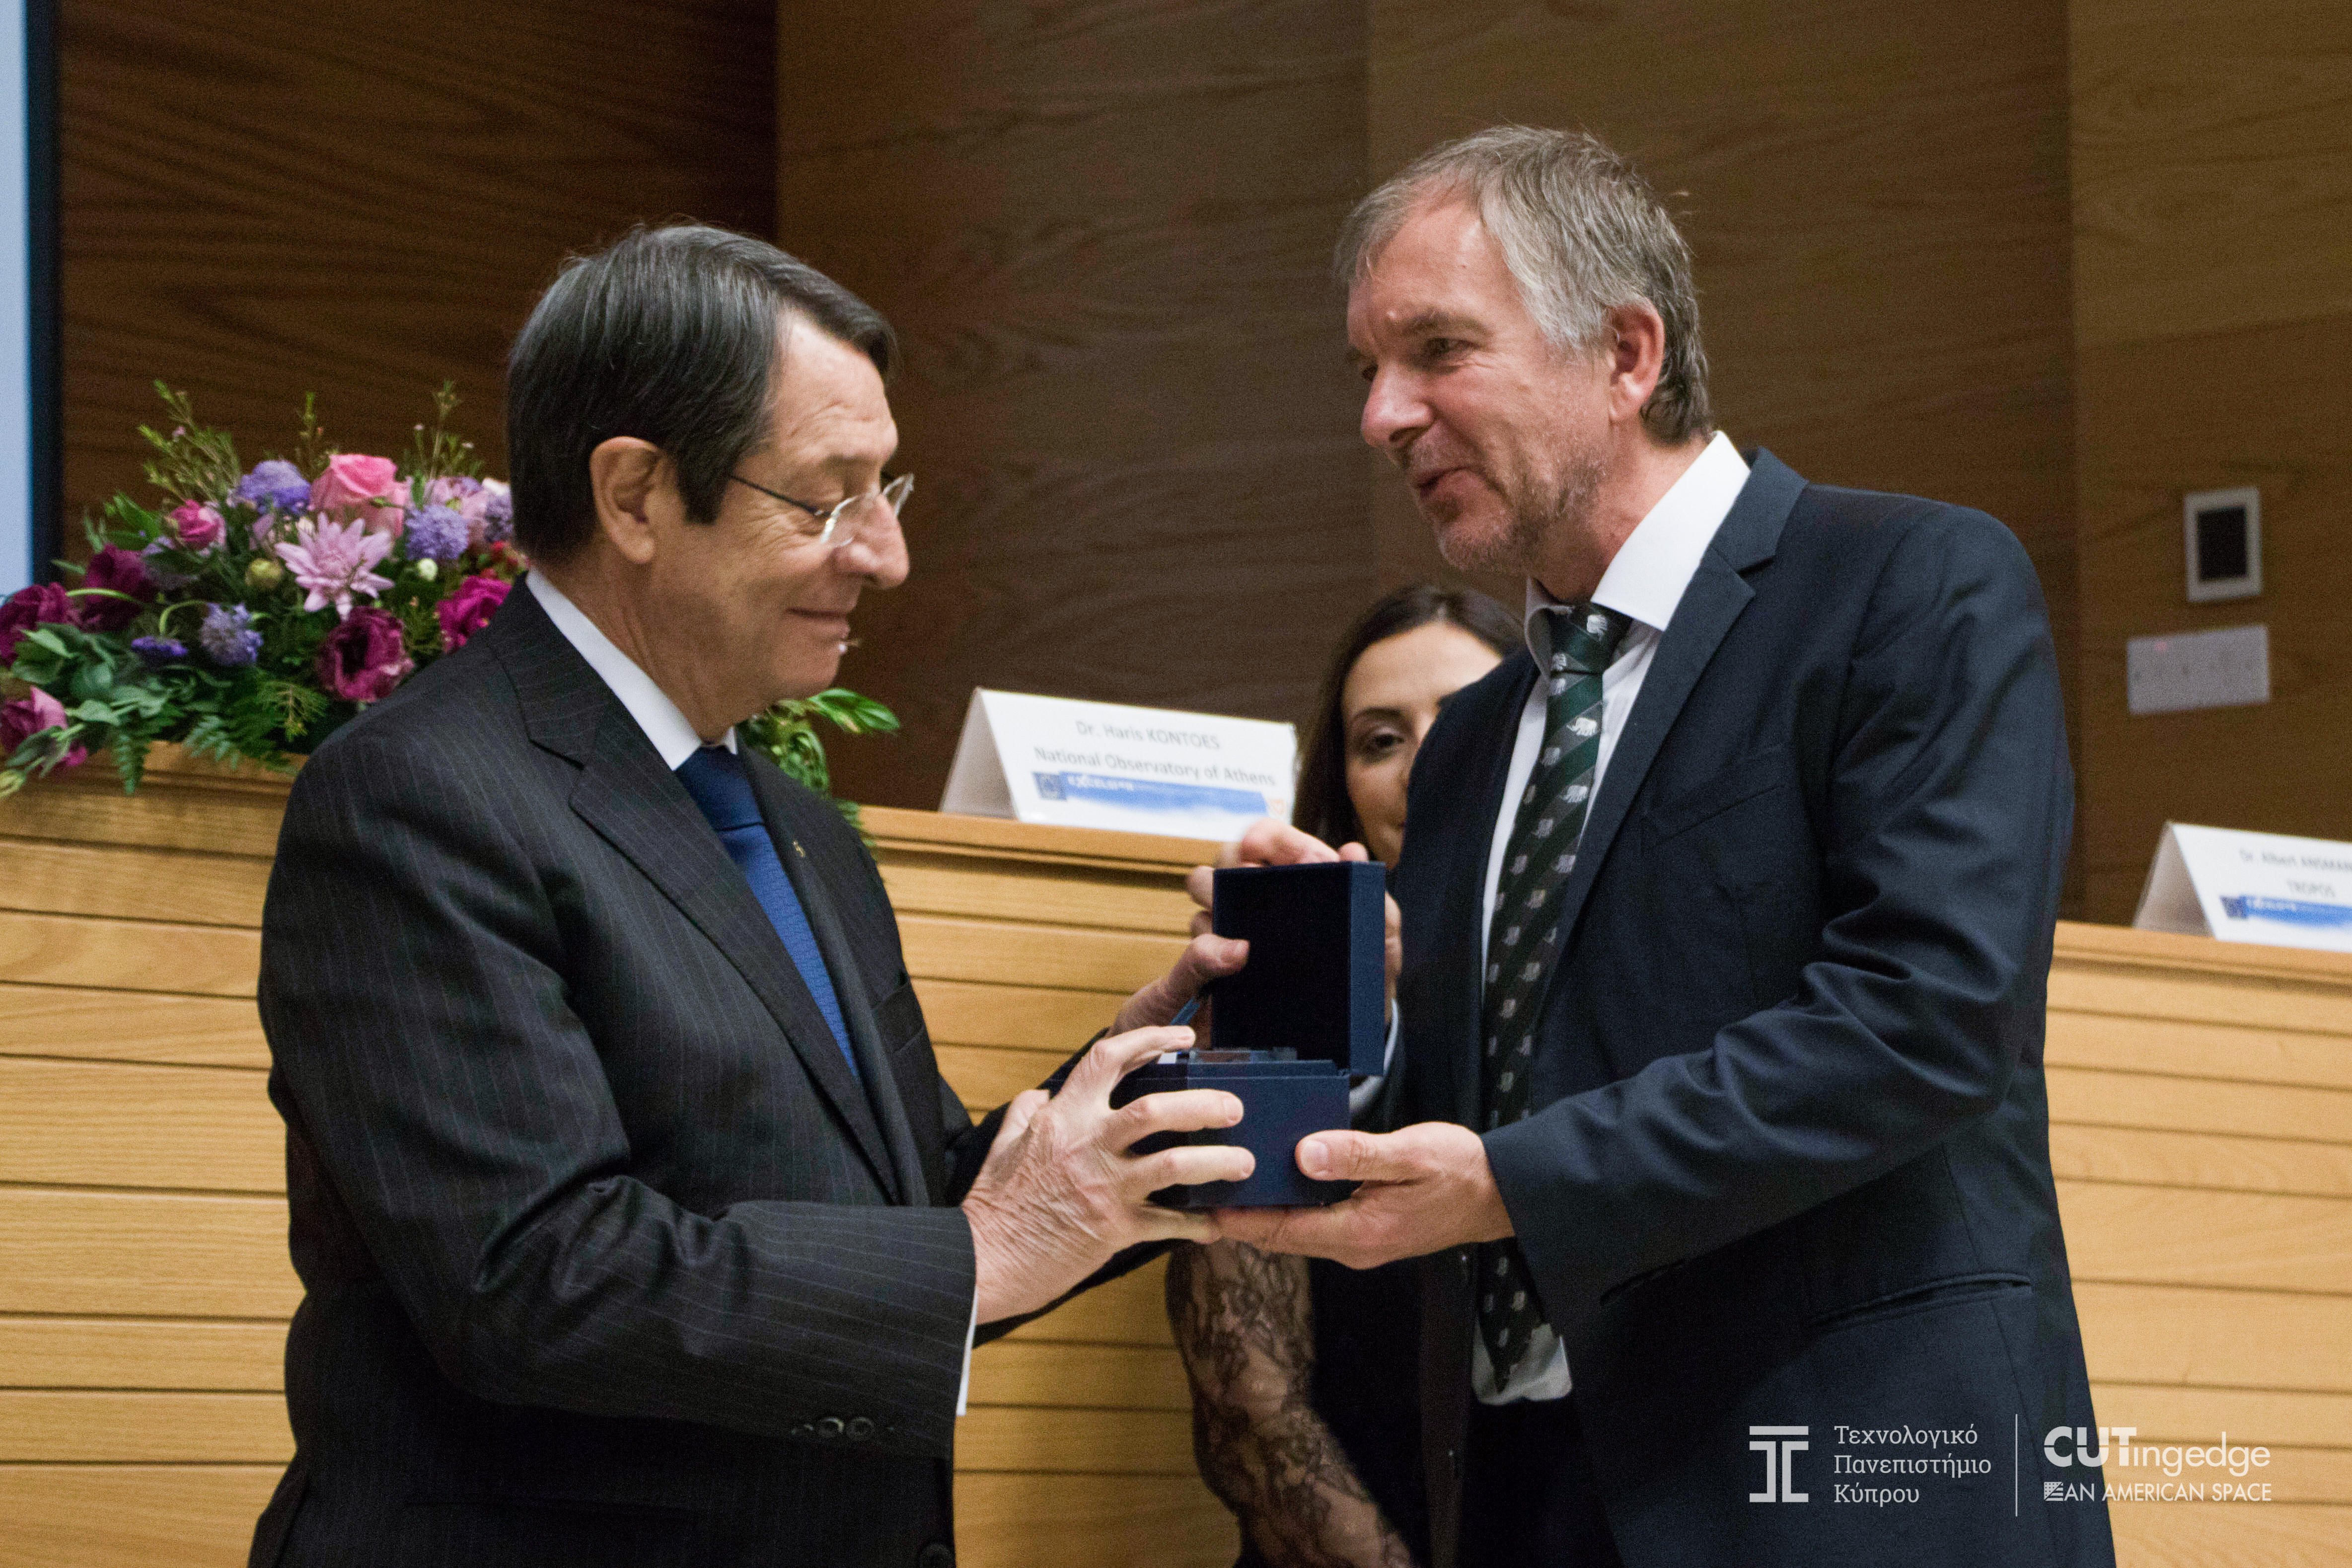 On the occasion of the opening ceremony of the EXCELSIOR project, the Cypriot President Anastasiades receives a present from DLR as a guest gift from Gunter Schreier, Deputy Director of DFD and Head of DLR’s share in the project.